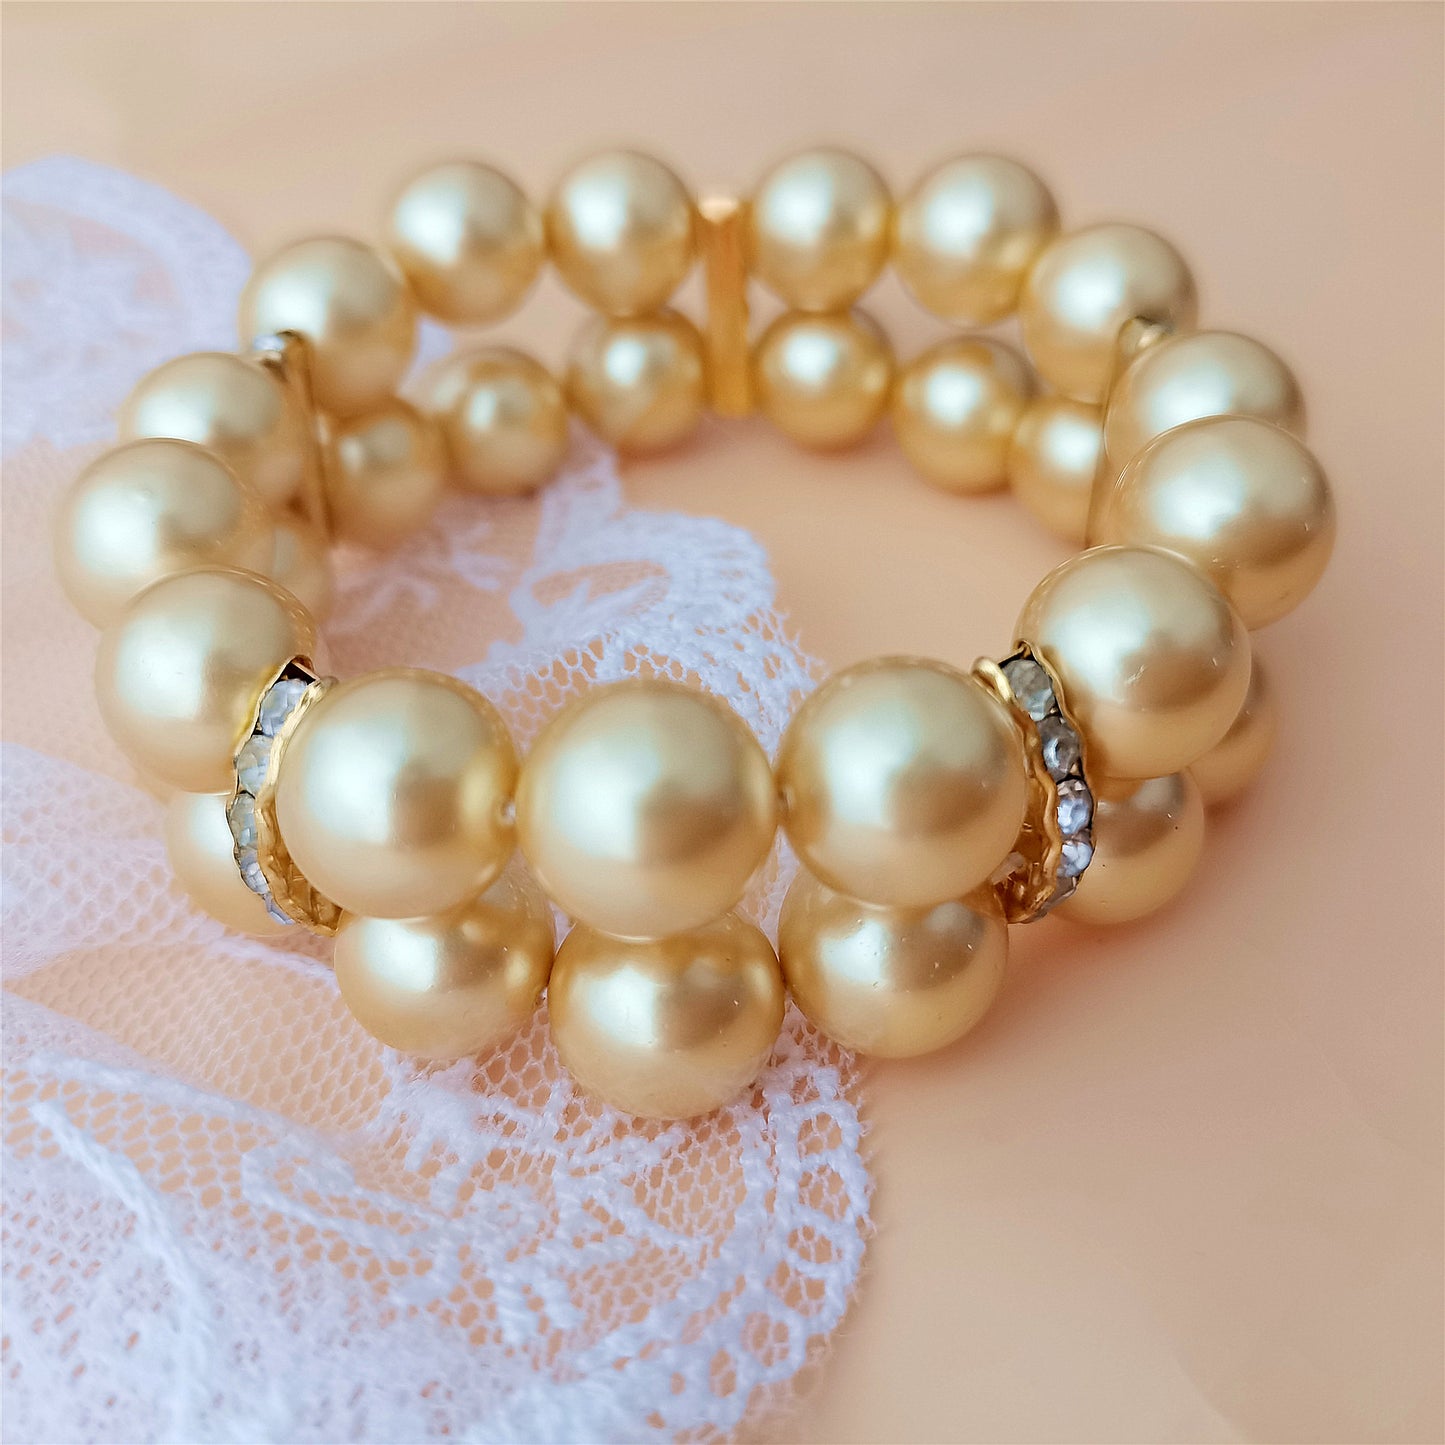 12MM Golden Shell Pearl Two Rows Bracelet 7" South Sea Beaded Elastic Bangle